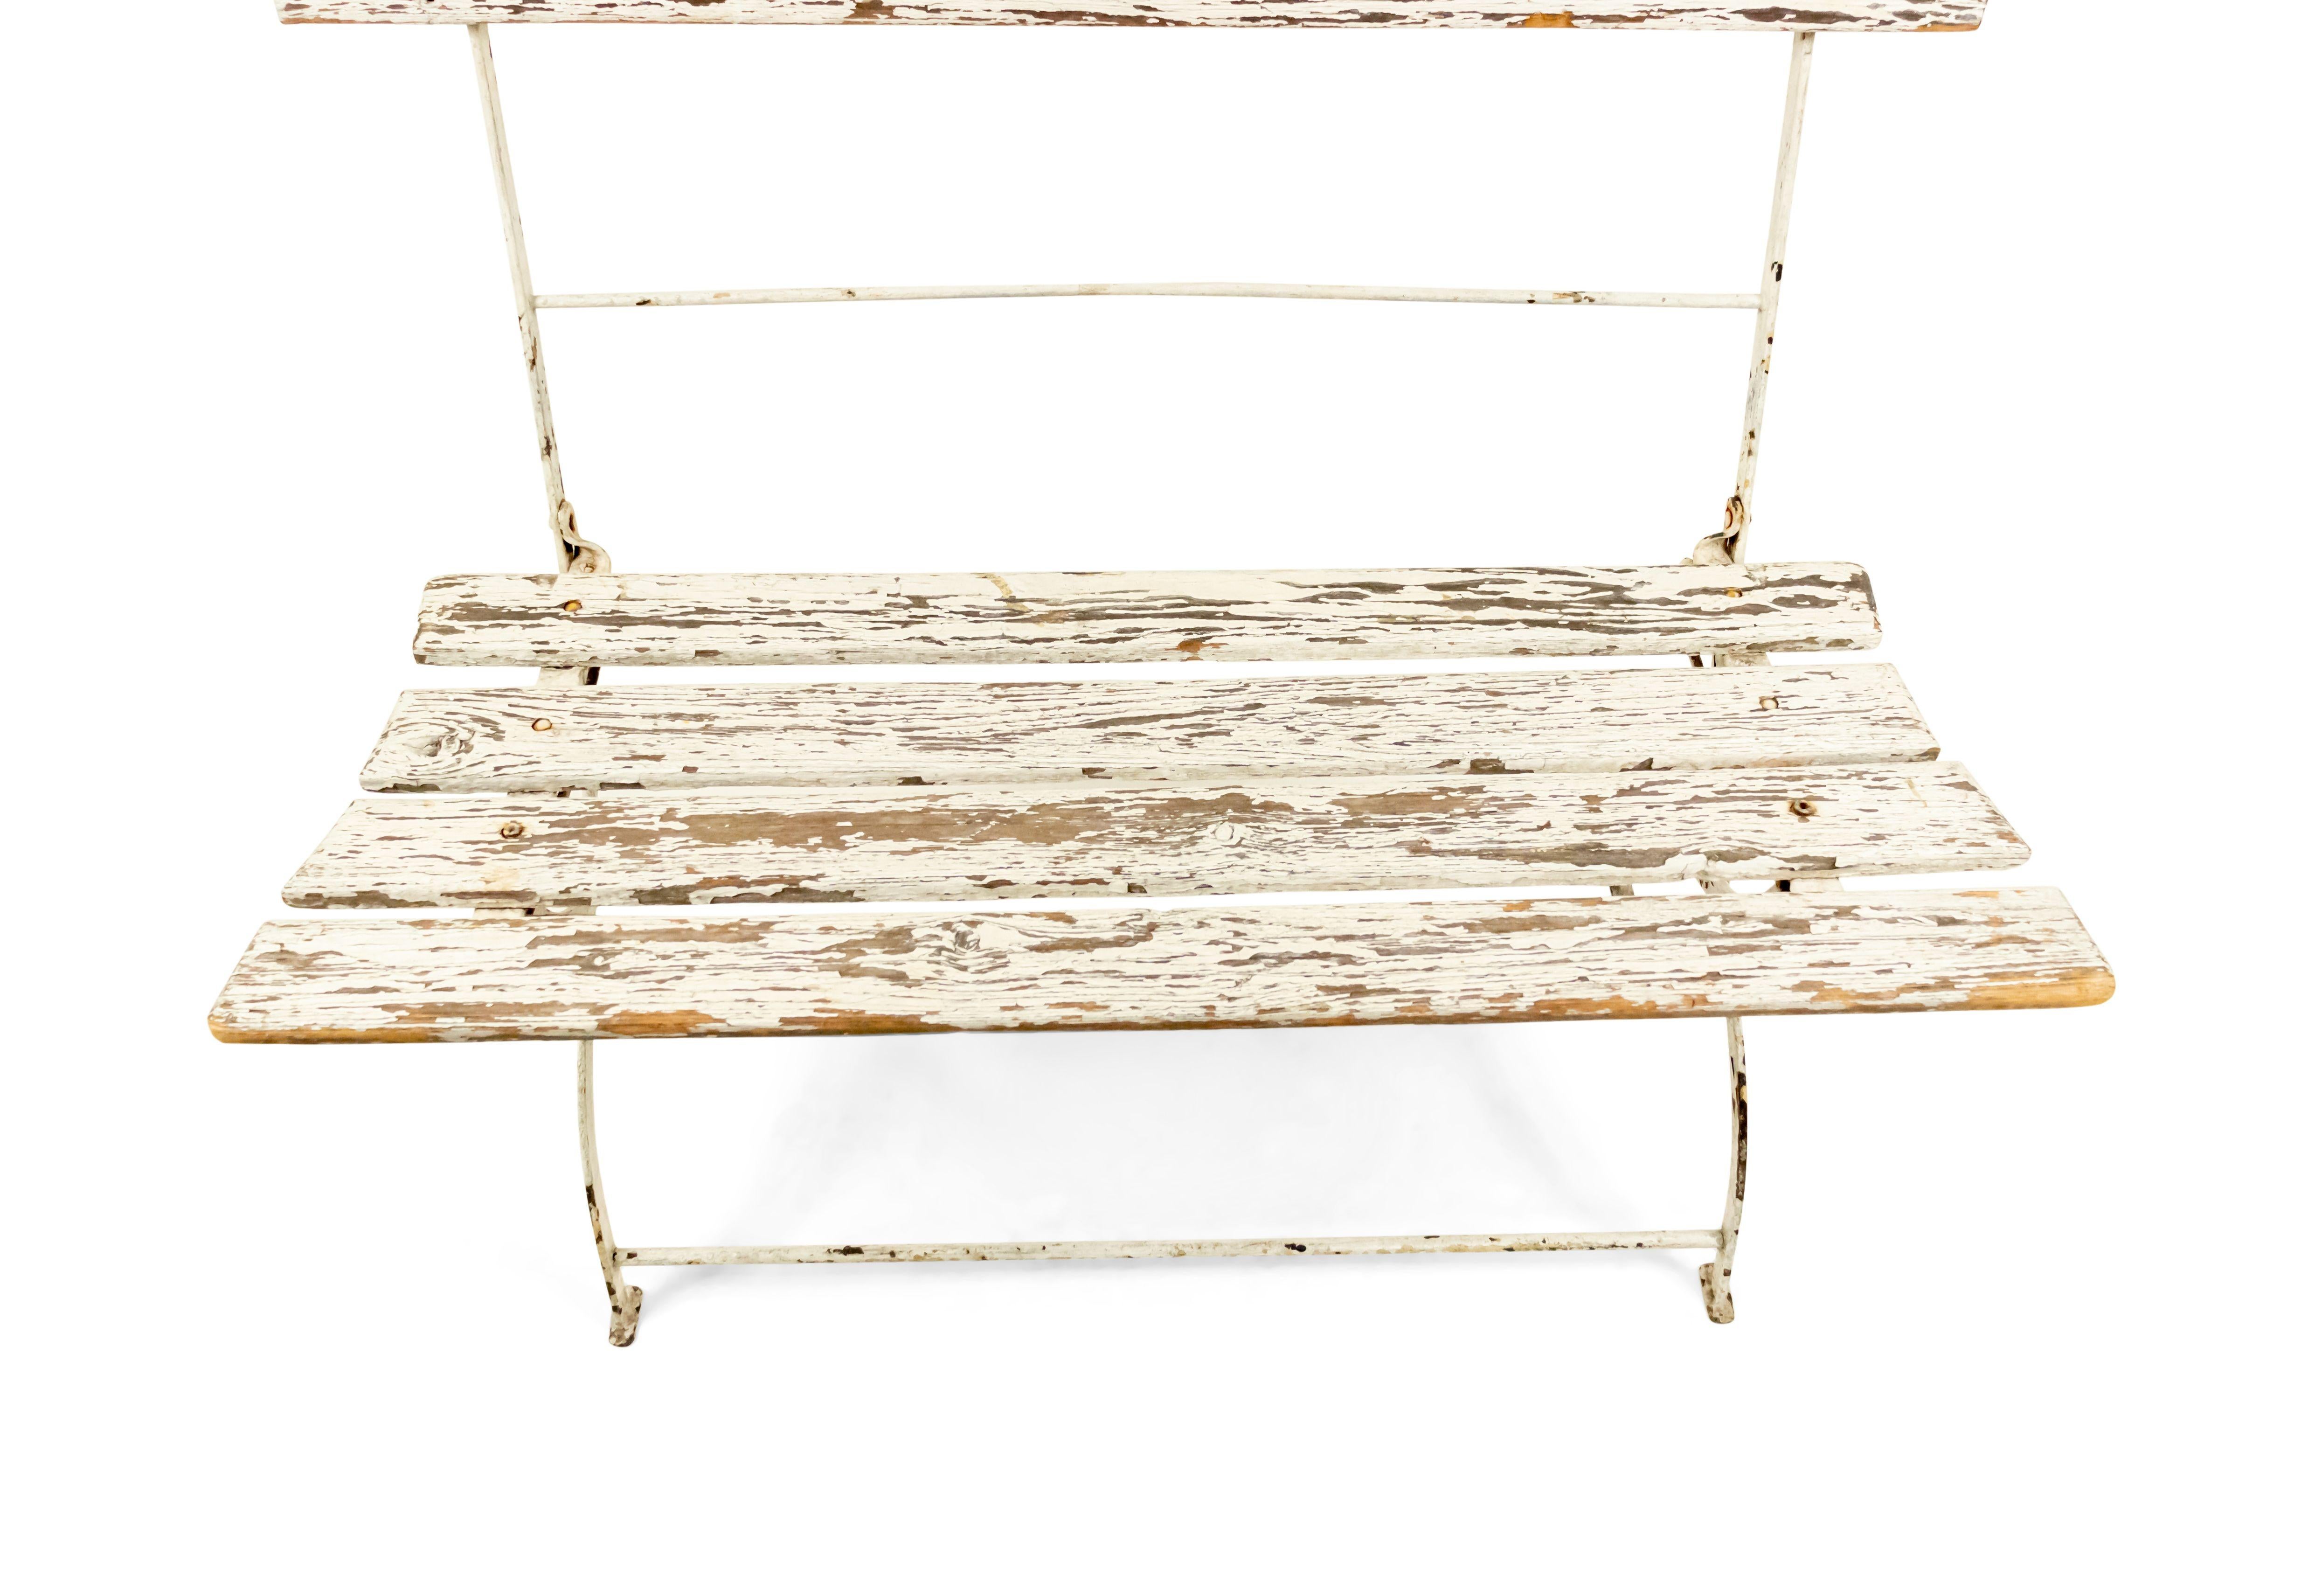 American Country style Outdoor folding iron loveseat with a weathered white painted wood slat design seat and single slat back.
     